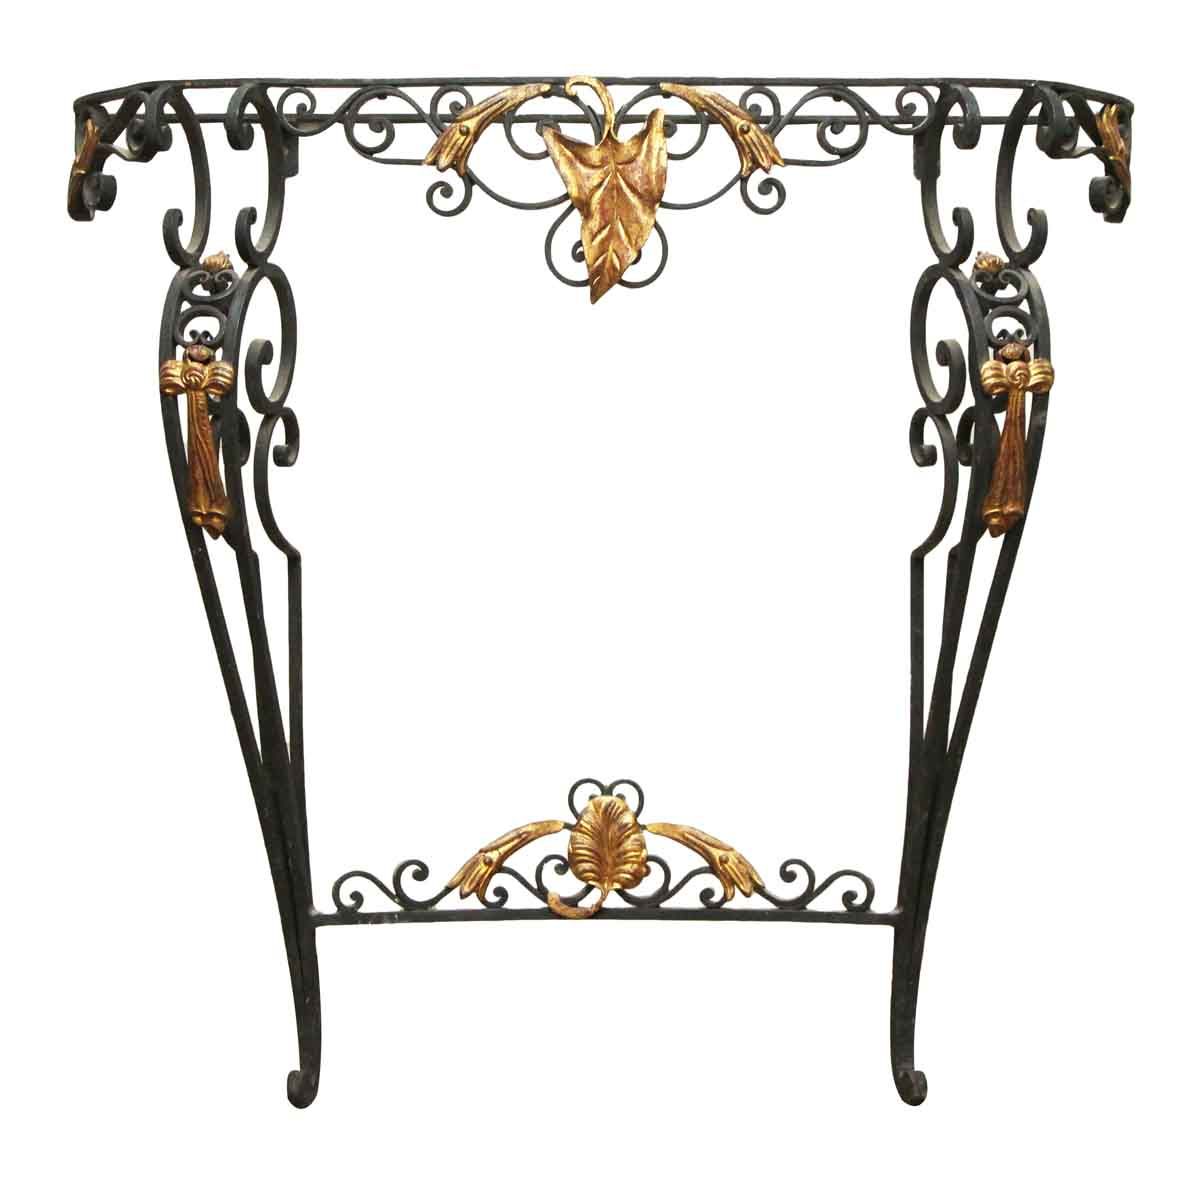 Wrought Iron Console Table With Gilded Detail | Olde Good Things Intended For Wrought Iron Console Tables (View 6 of 20)